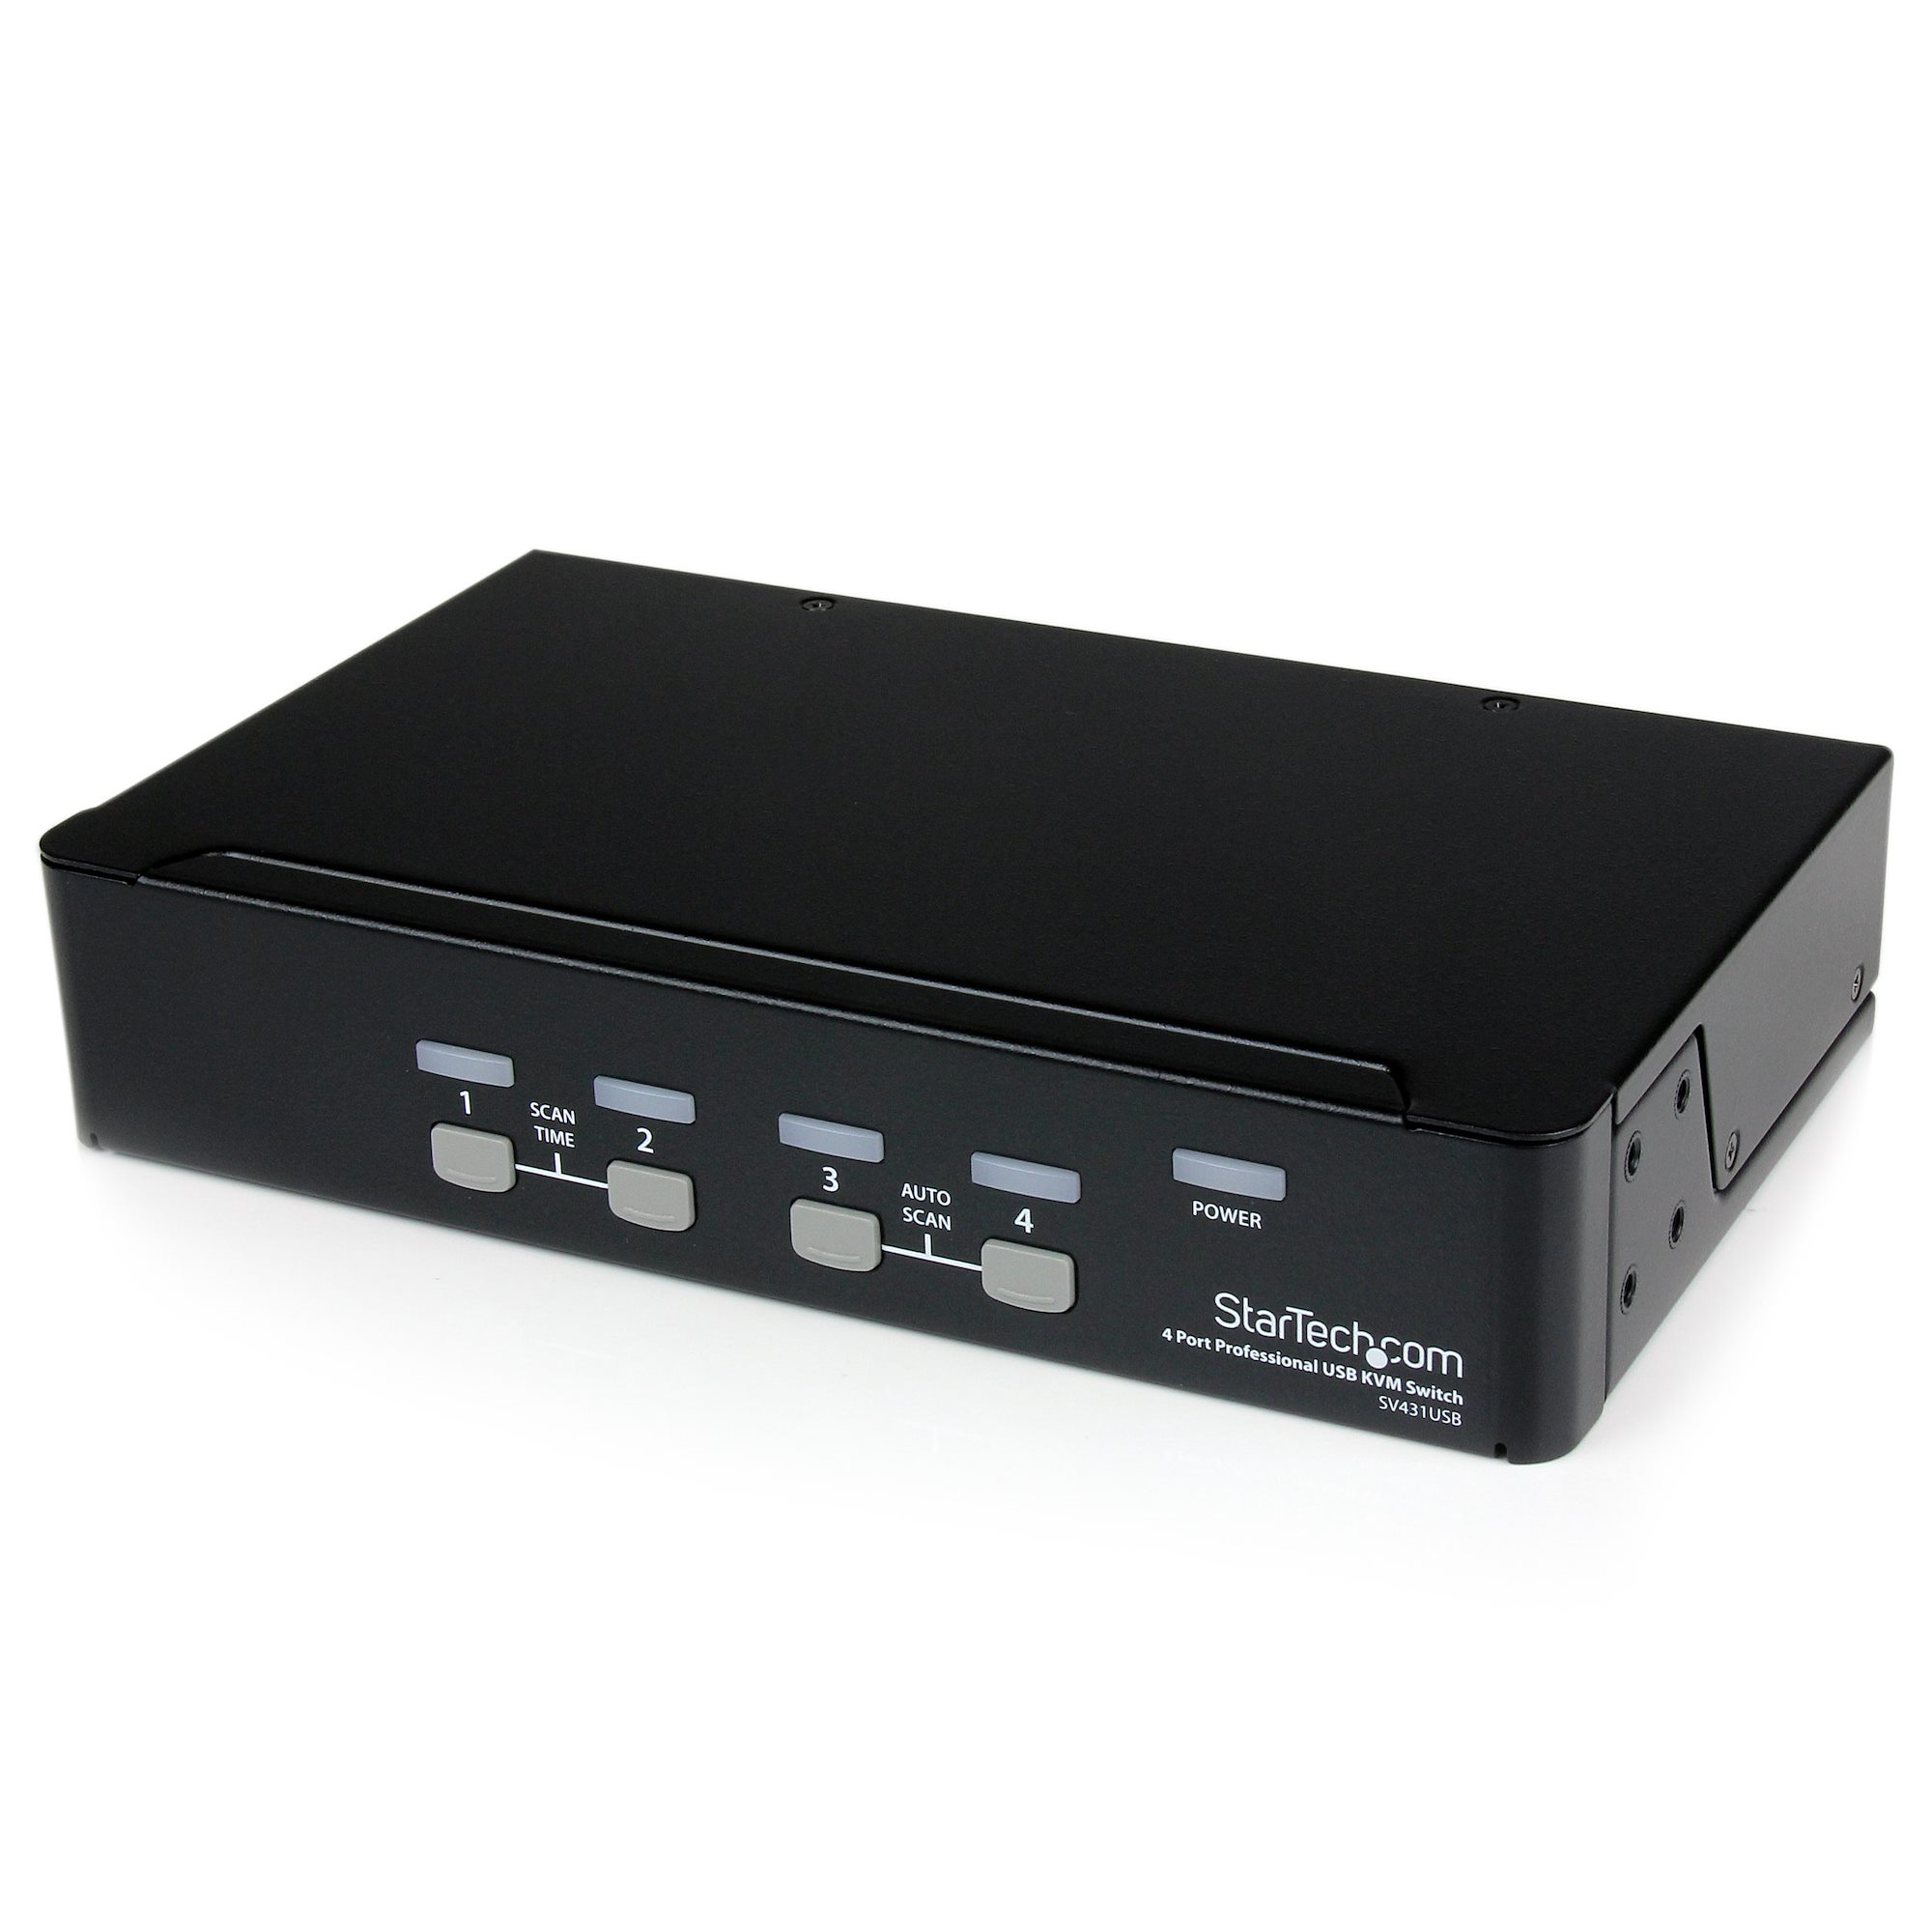 Renewed 4 Port VGA KVM Switch with USB Hub Support Wireless Keyboard Mouse Connection and Push Button Switching Function 